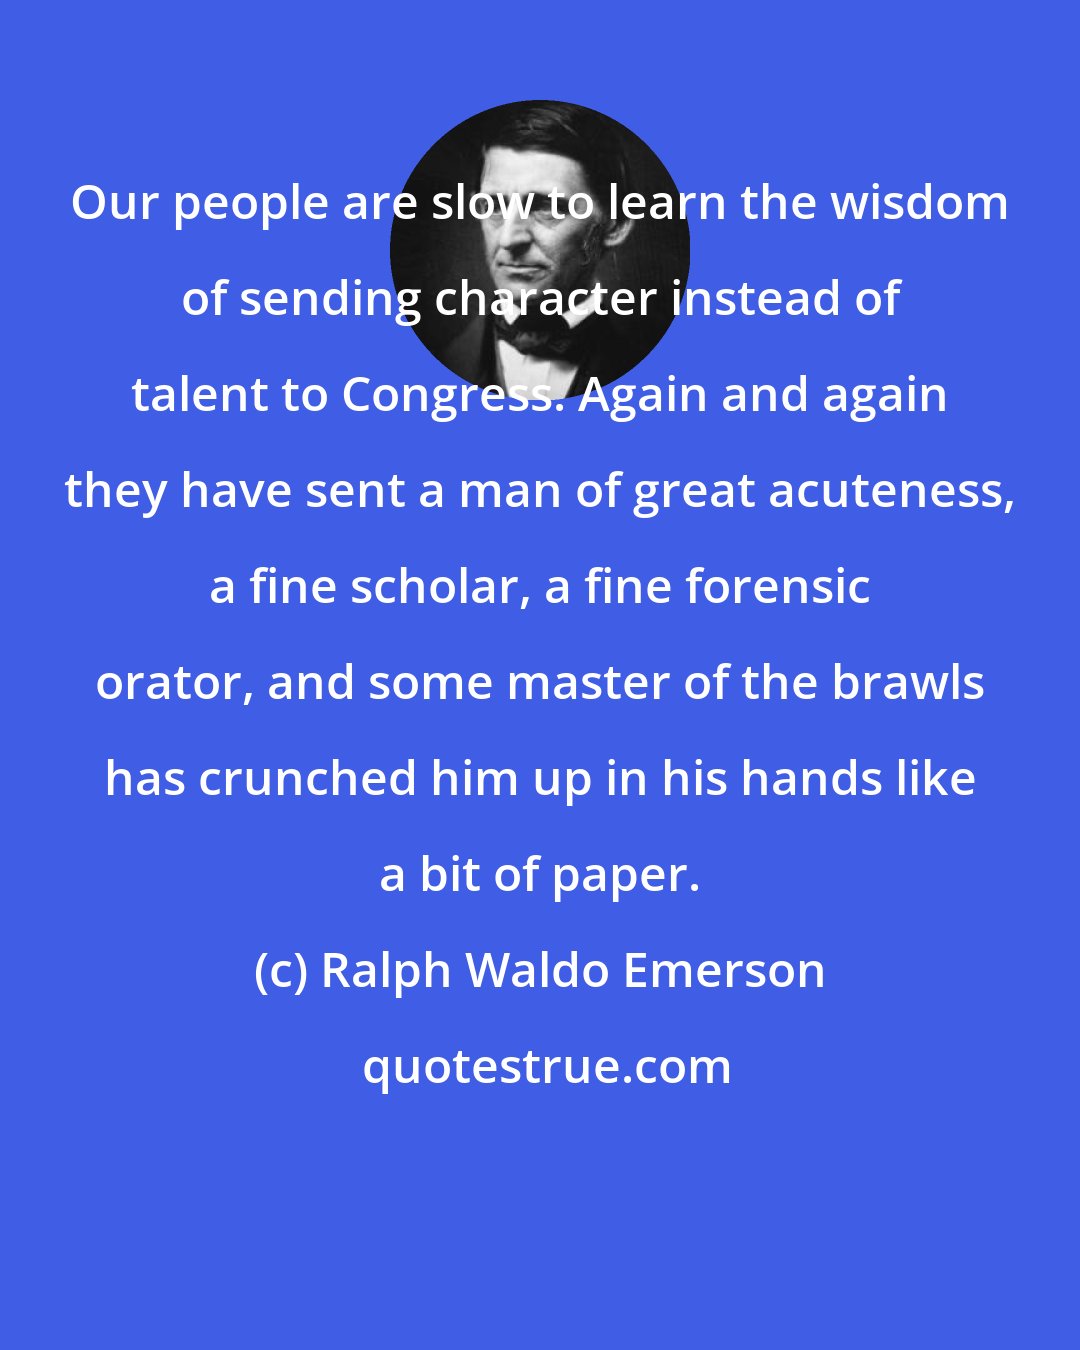 Ralph Waldo Emerson: Our people are slow to learn the wisdom of sending character instead of talent to Congress. Again and again they have sent a man of great acuteness, a fine scholar, a fine forensic orator, and some master of the brawls has crunched him up in his hands like a bit of paper.